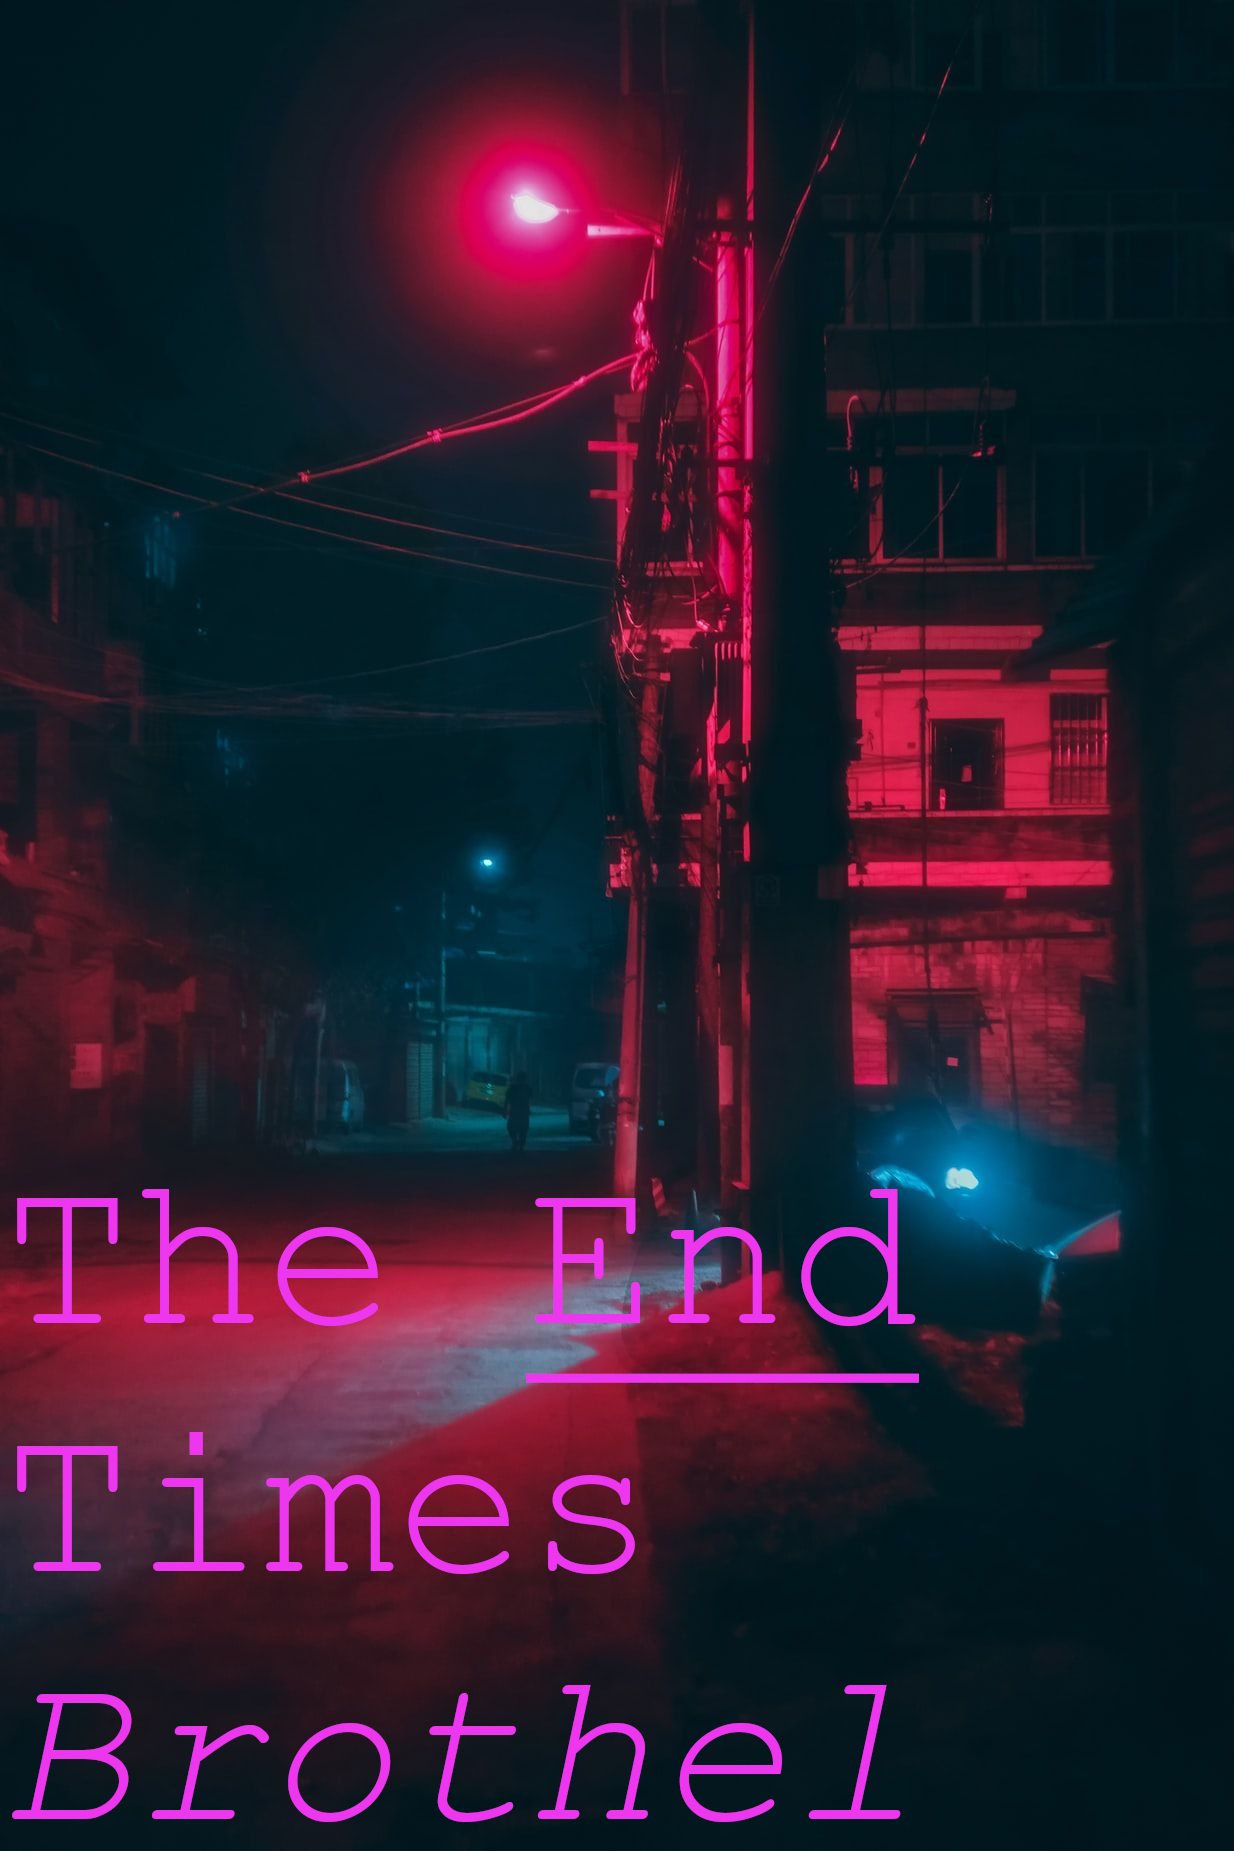 The End Times Brothel main image